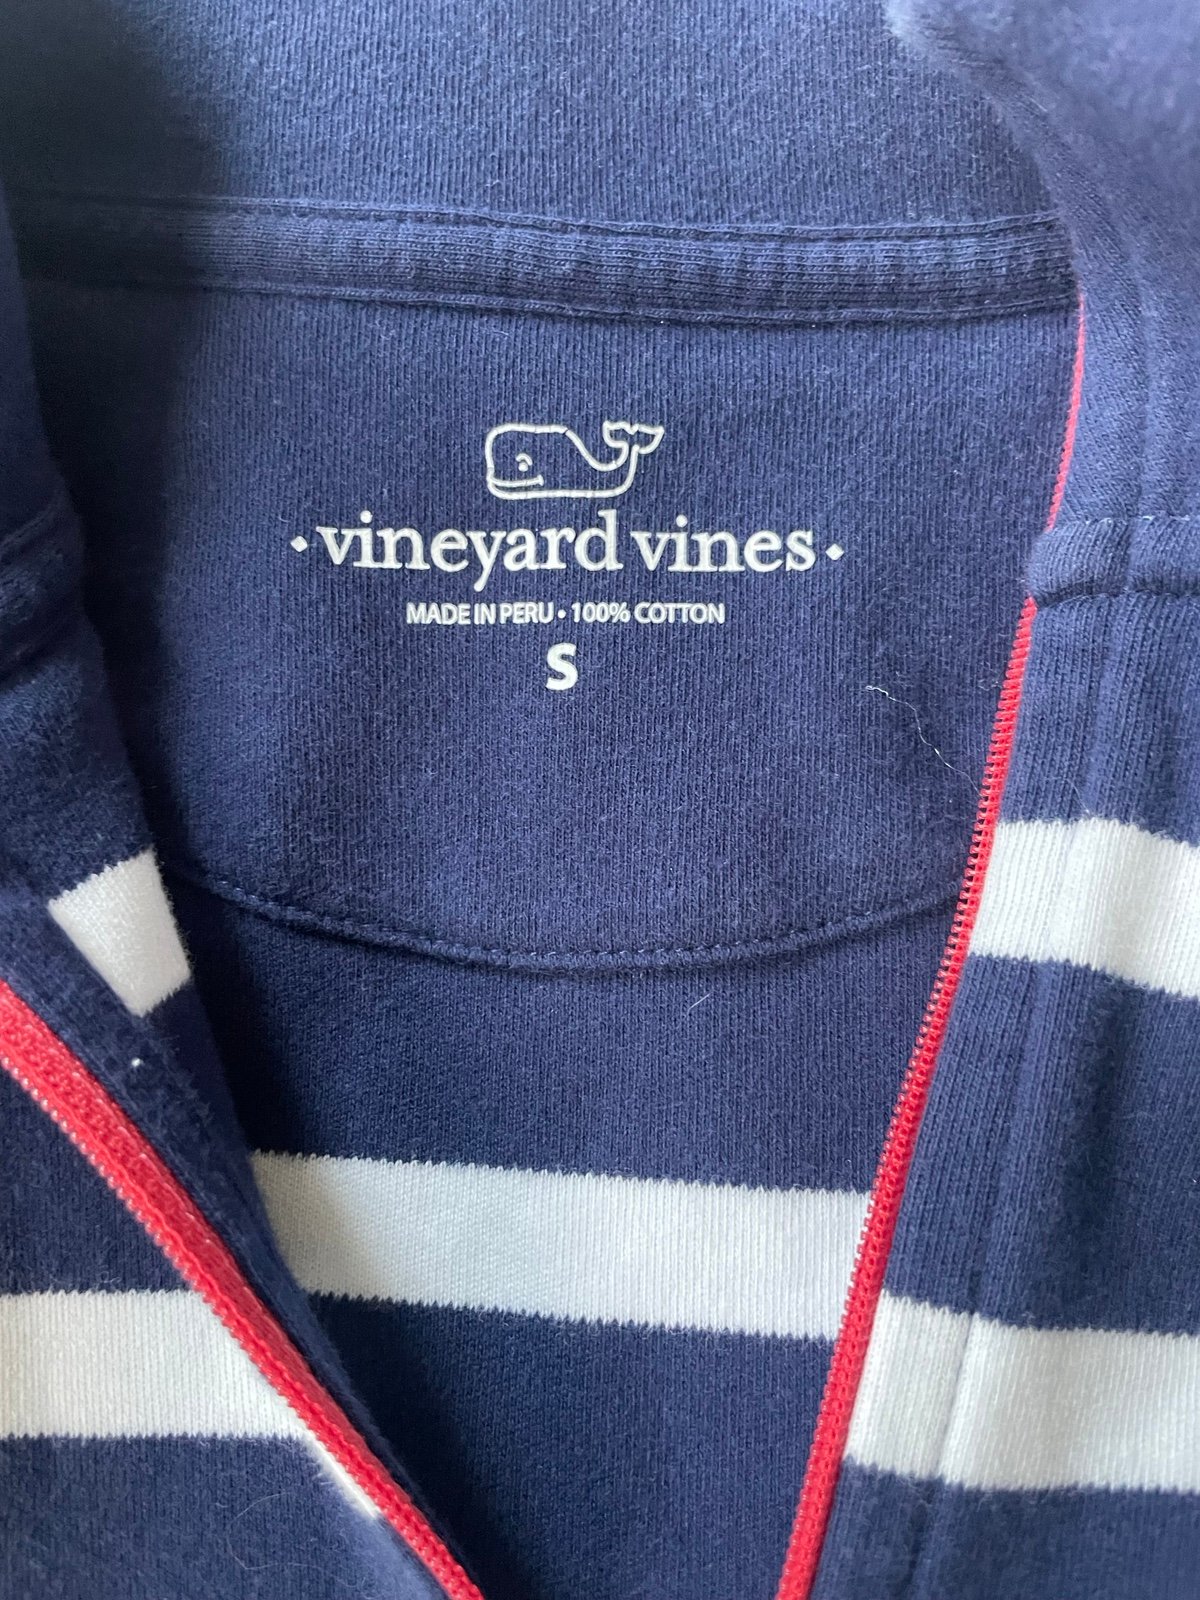 large selection vineyard vines pullover PgpdK8fwL Buying Cheap